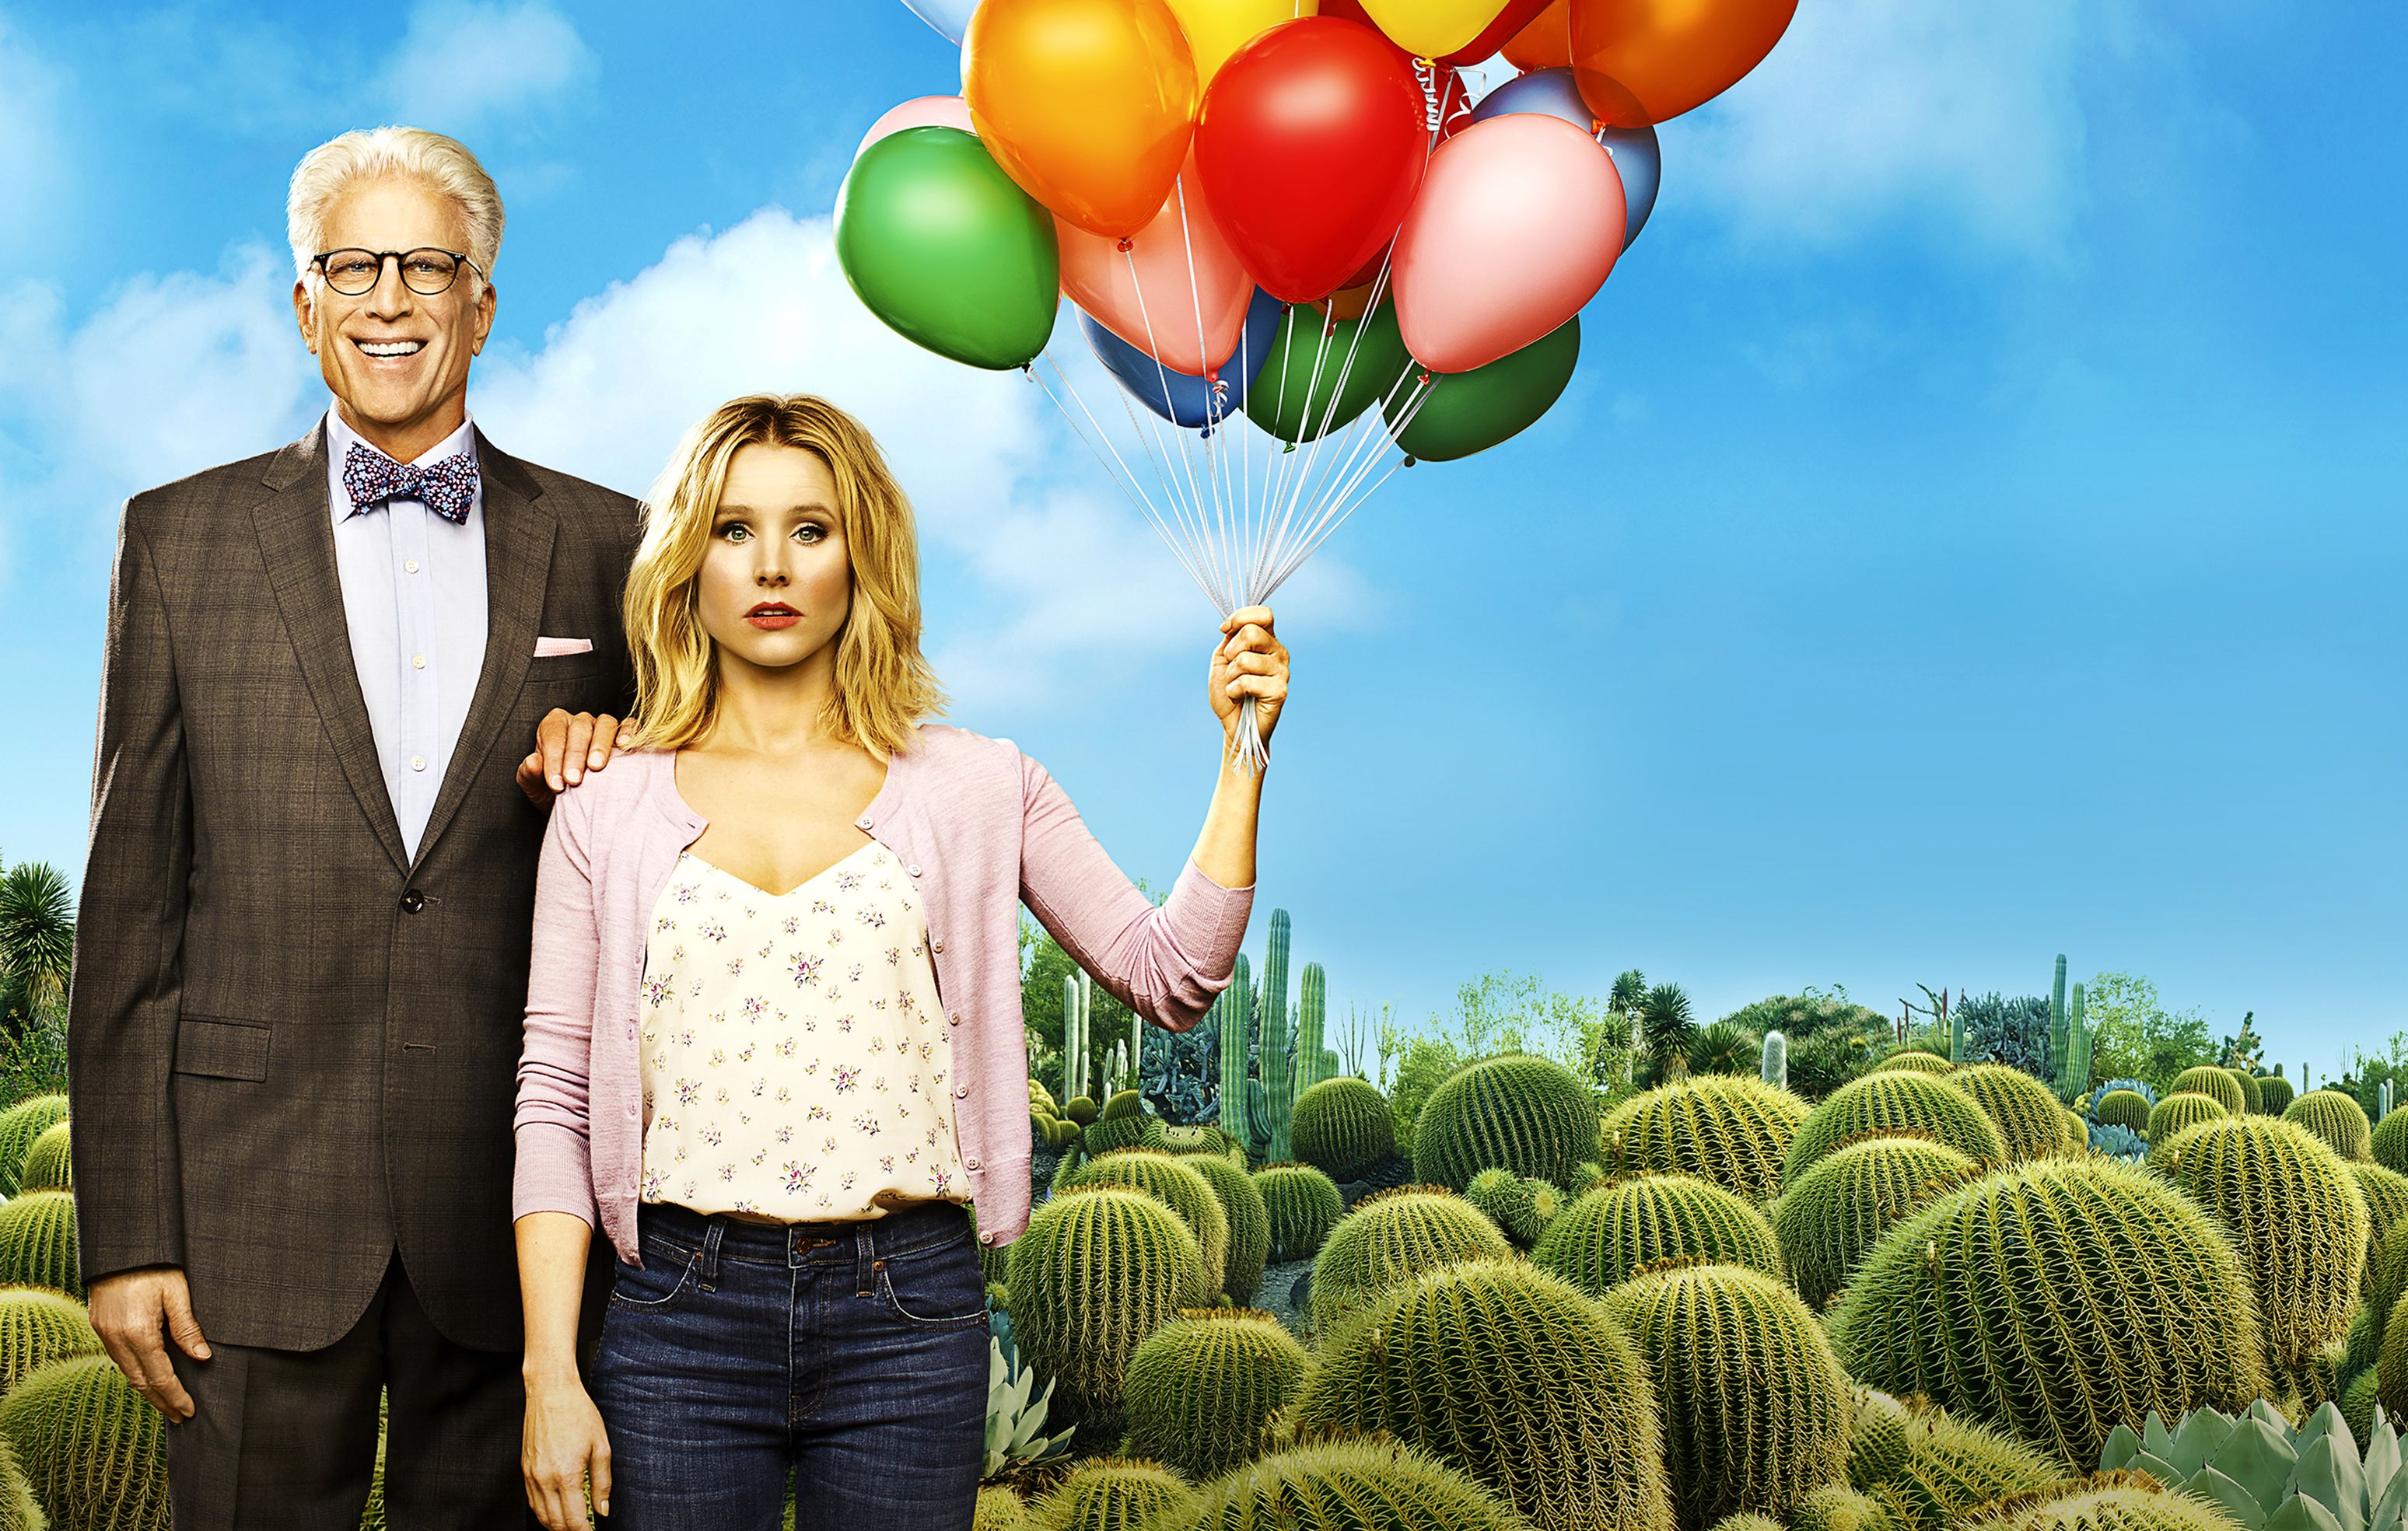 3096x1969 The Good Place Hd Wallpaper Background Image 3096x1969